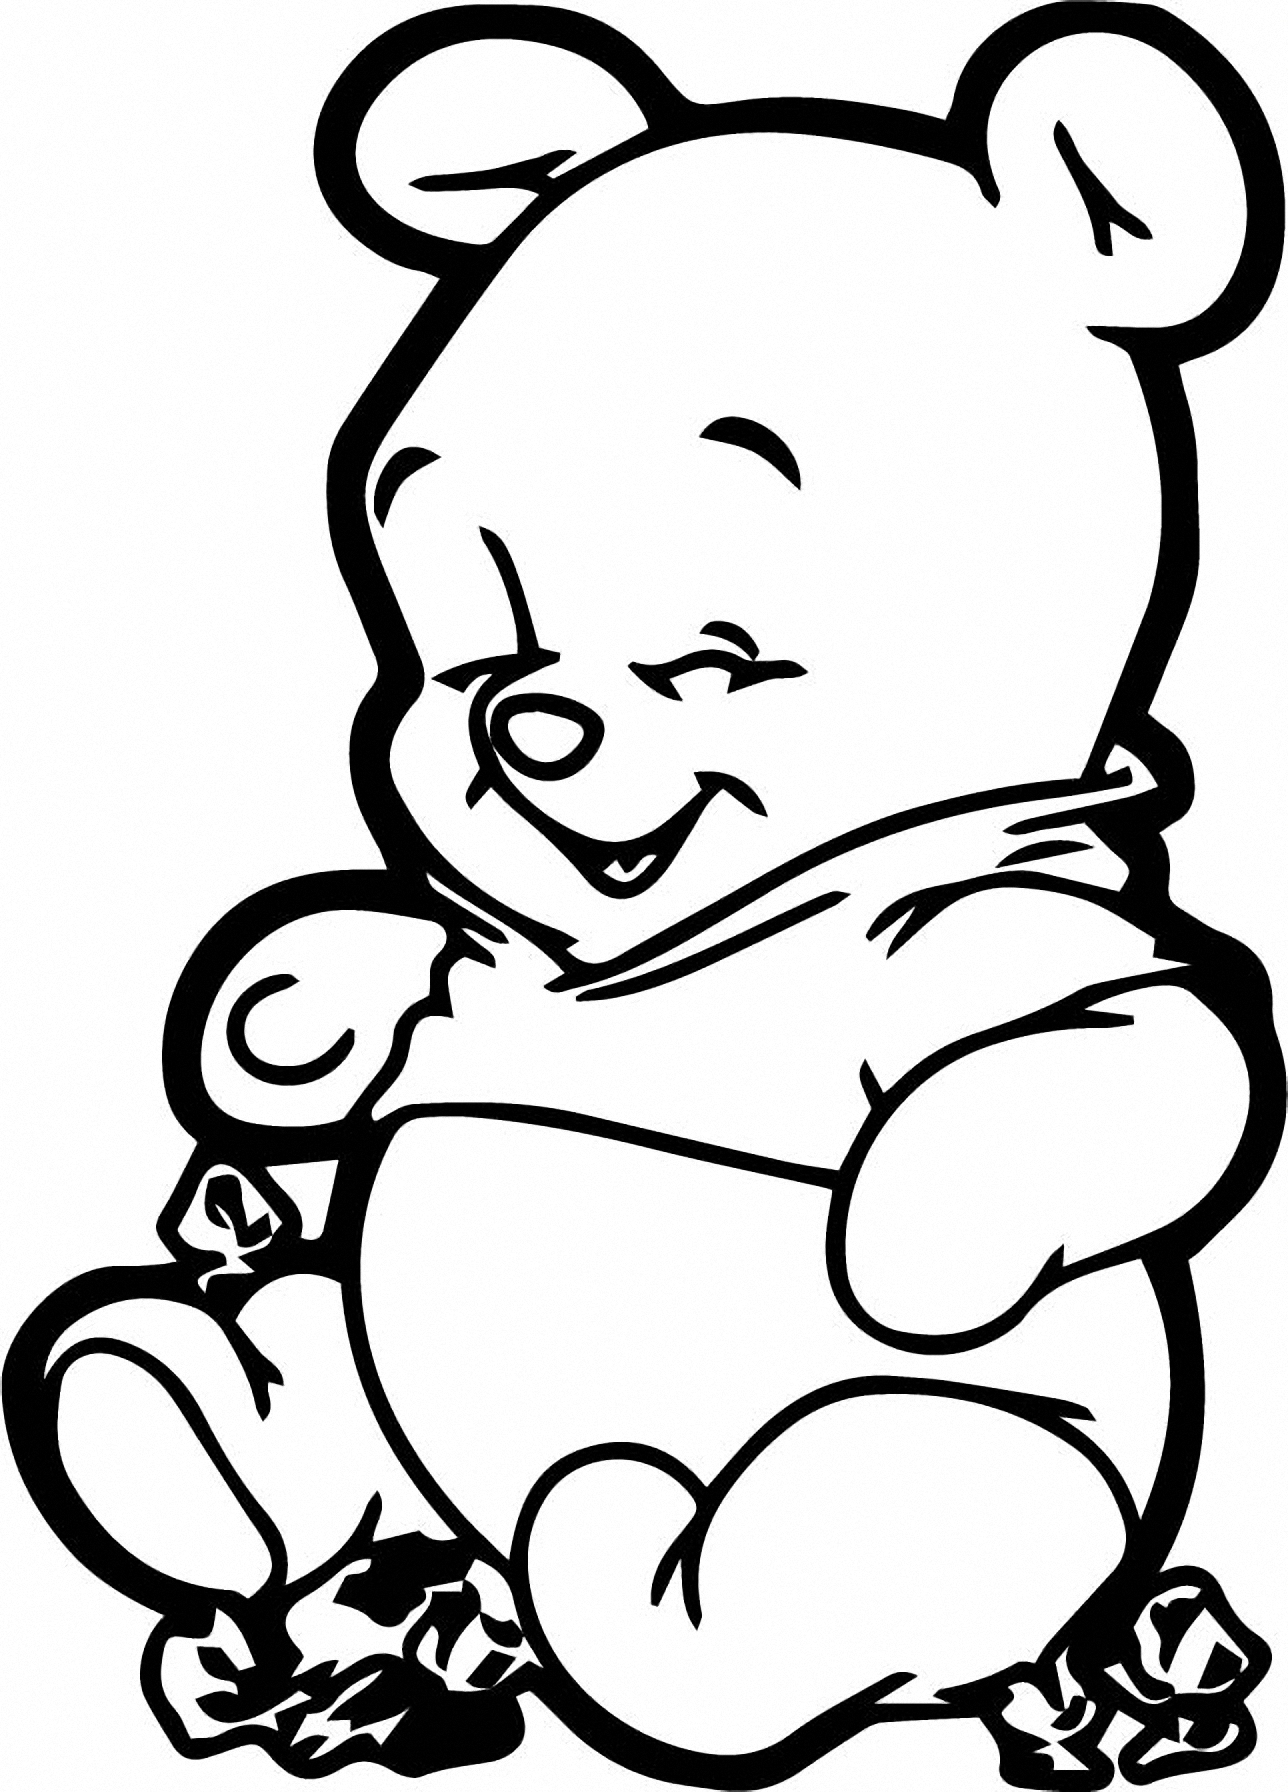 Winnie The Pooh Coloring Pages Awesome Winnie The Pooh Coloring Pages ...